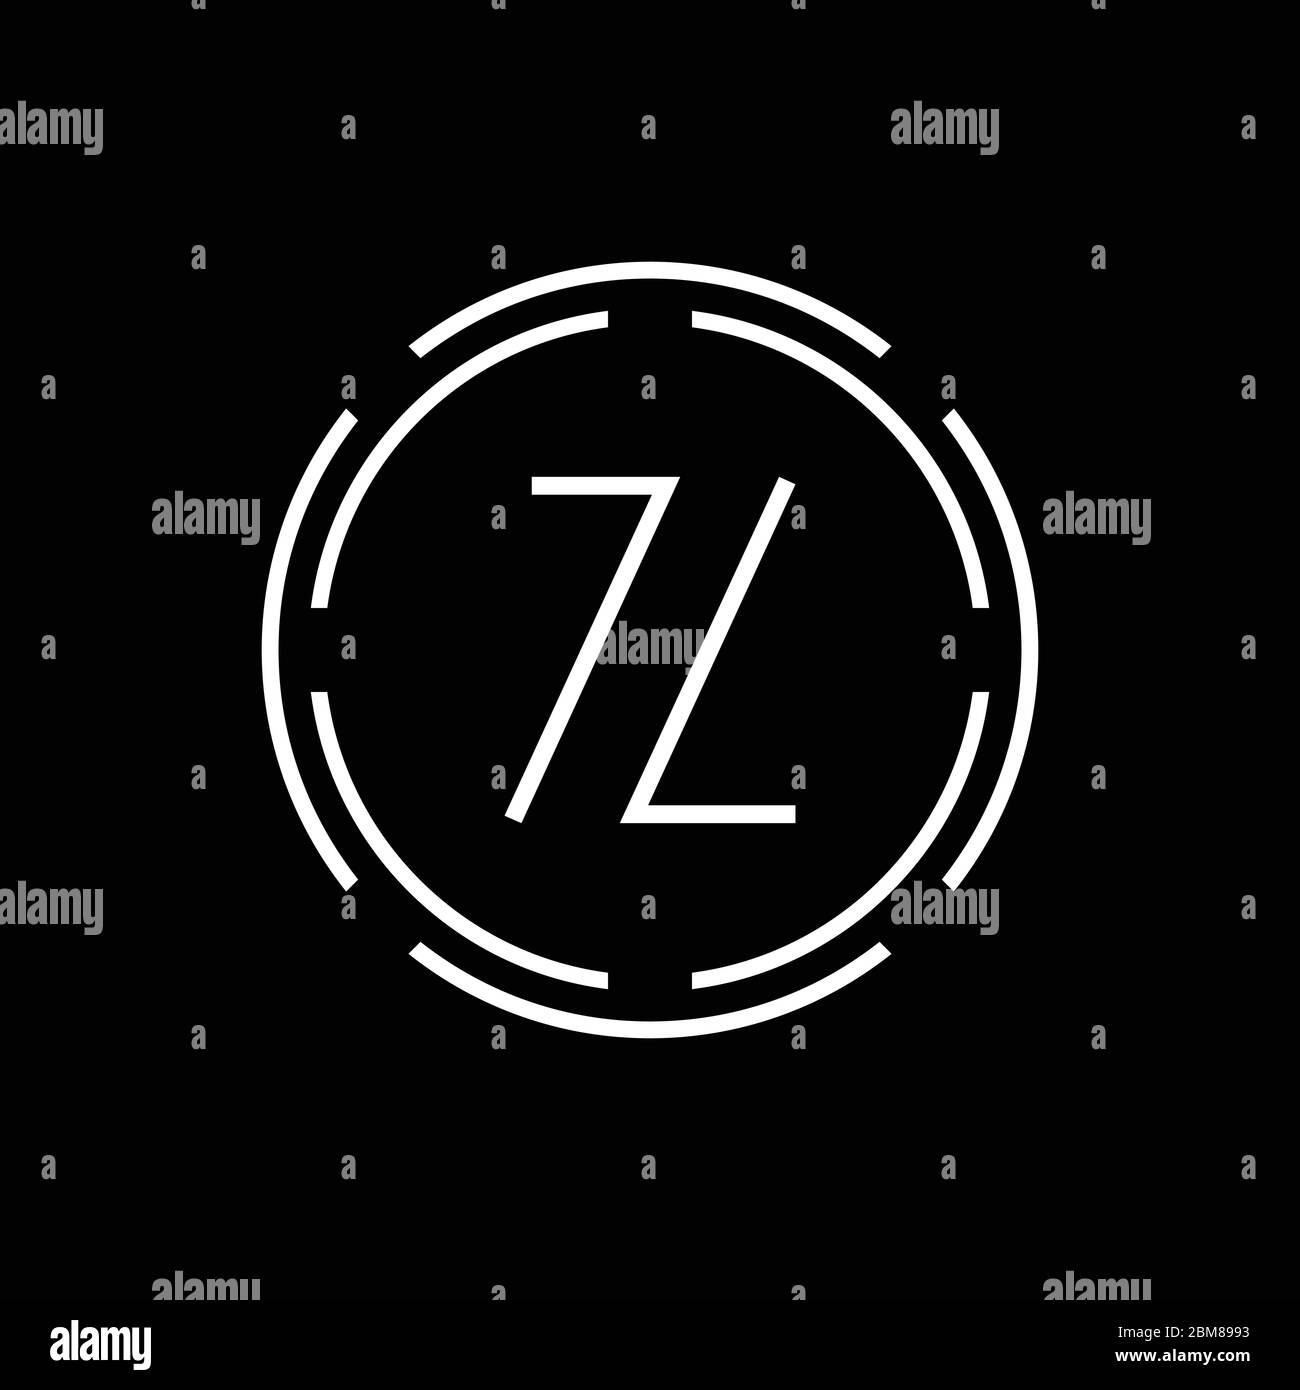 Initial Letter Z Logo With Luxury Business Typography Vector Template. Creative Abstract Letter Z Logo Design Stock Vector